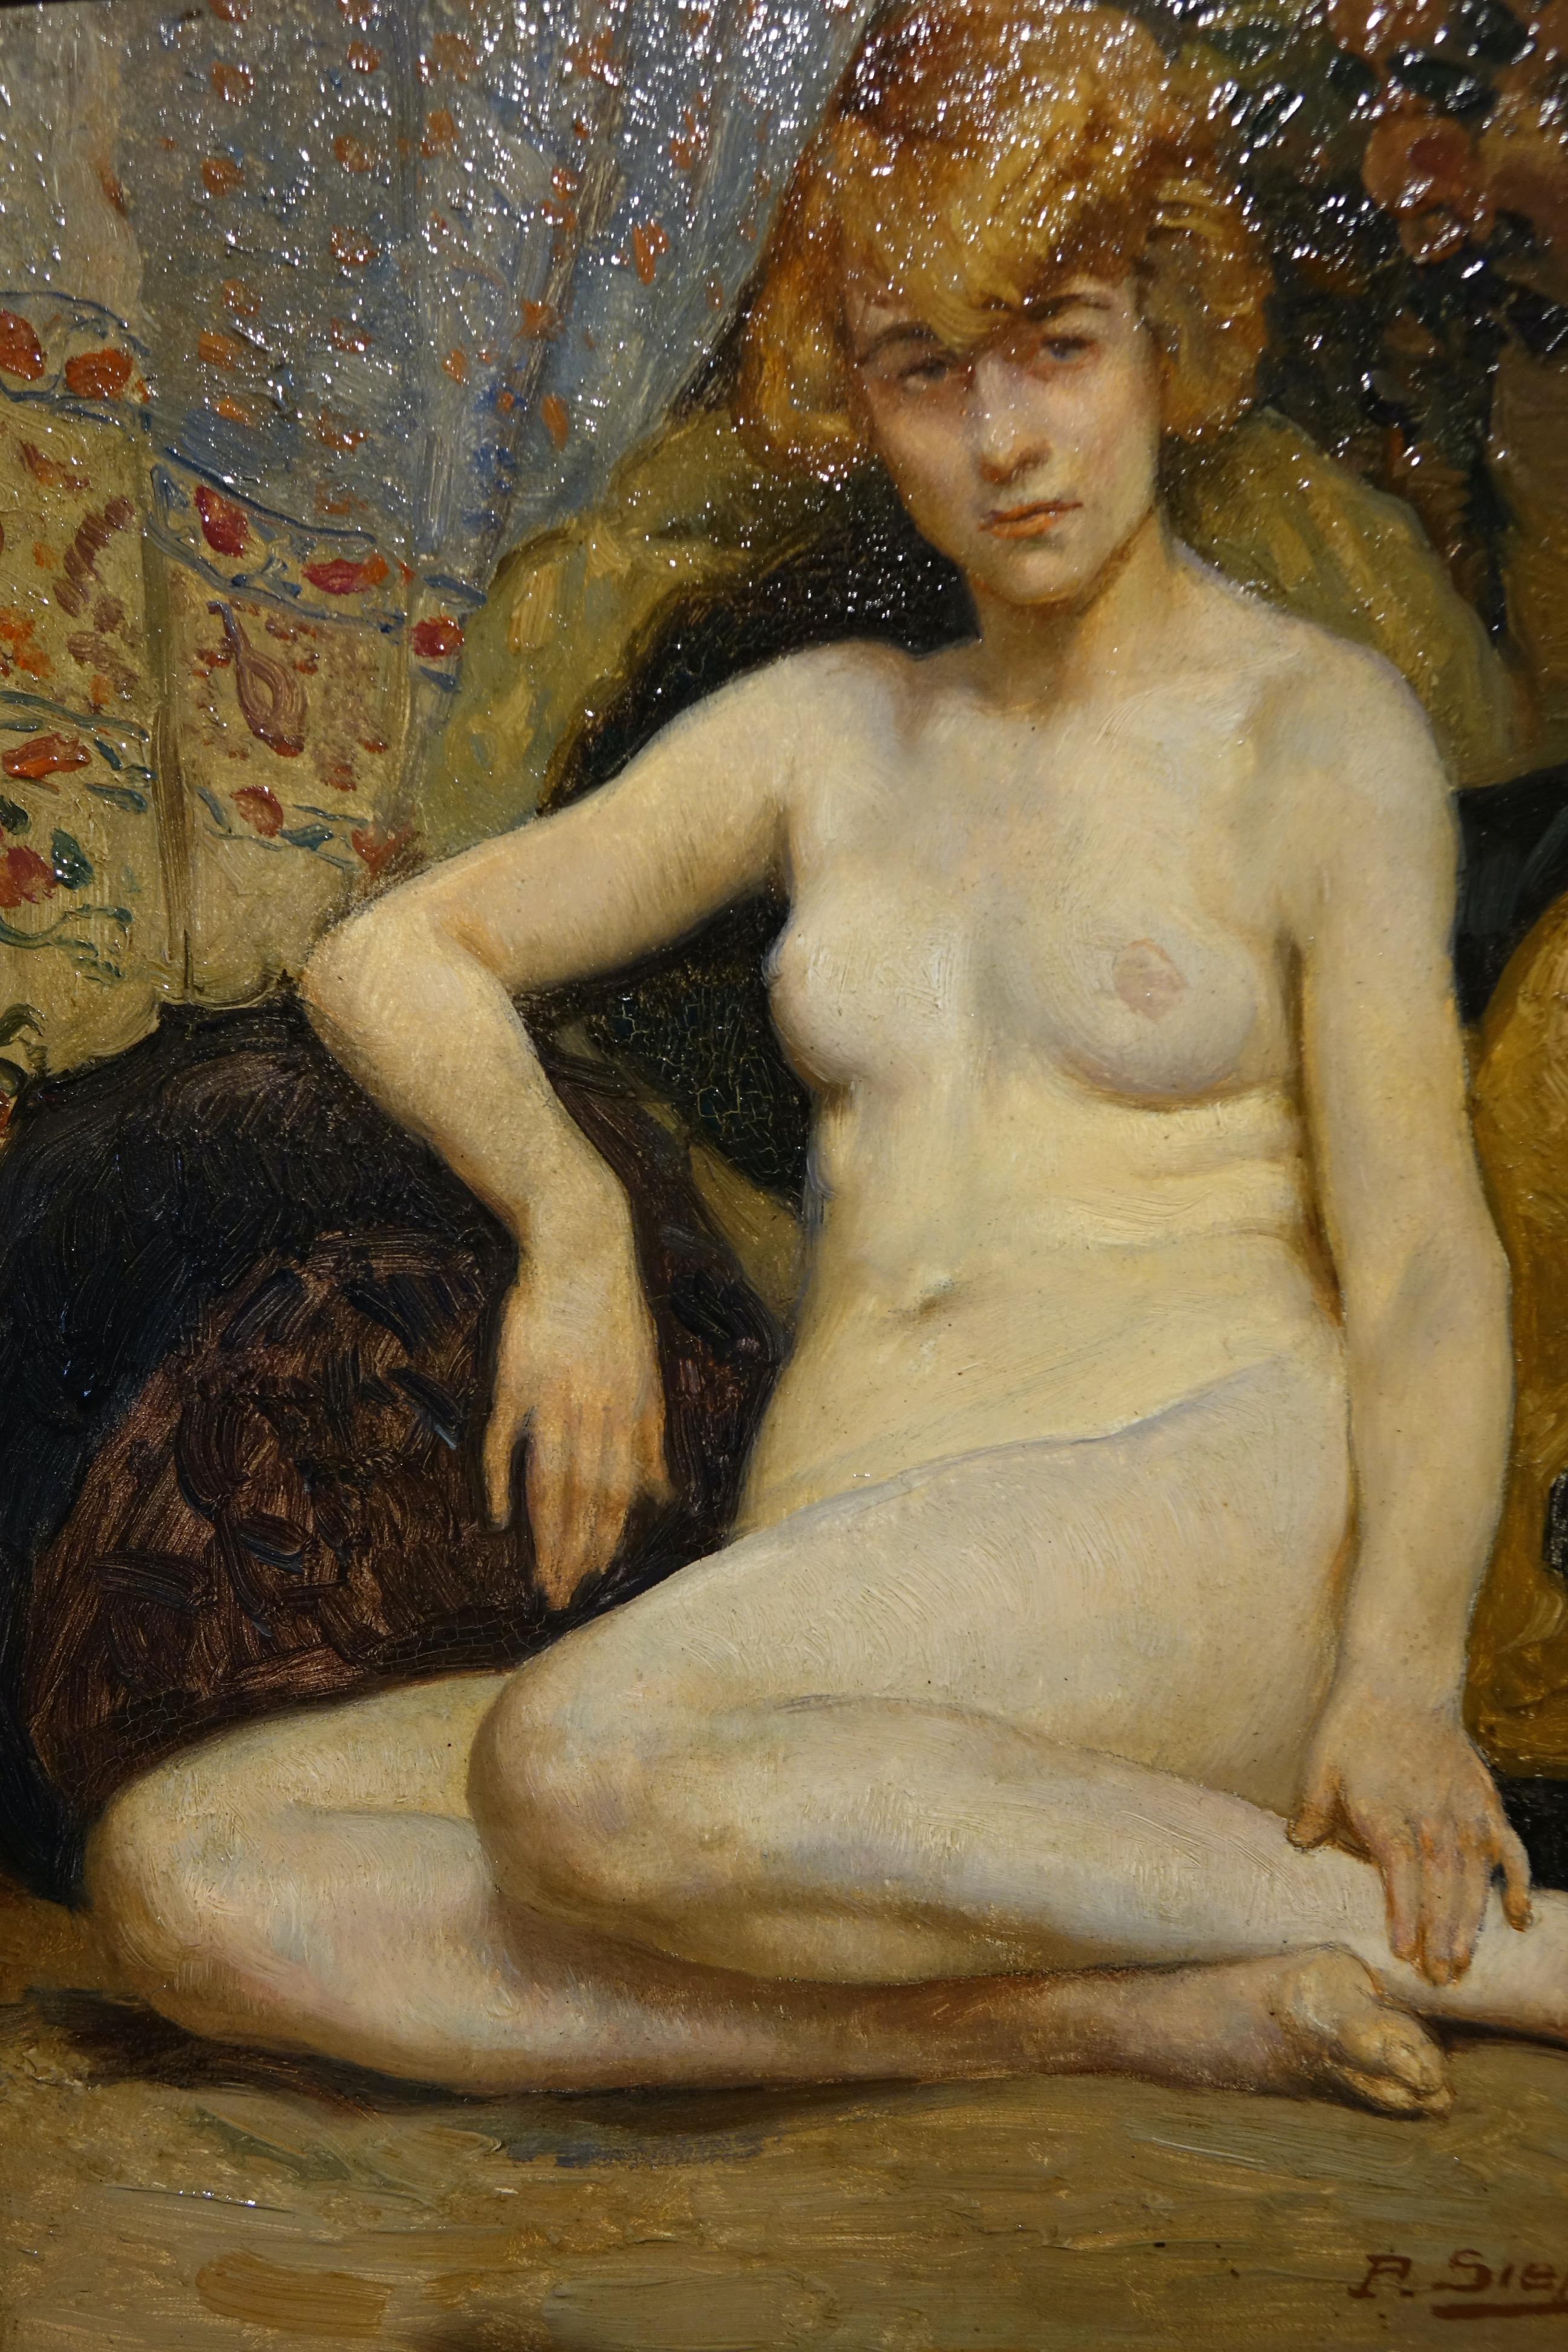 Naked young woman, probably on a bed, her legs tucked in , her right arm leaning against cushions. 
Oil on panel, signed lower right P.SIEFFERT, 1926 .
Paul SIEFFERT, French painter (1847-1957), known for his female nudes.
Paul Sieffert was the son